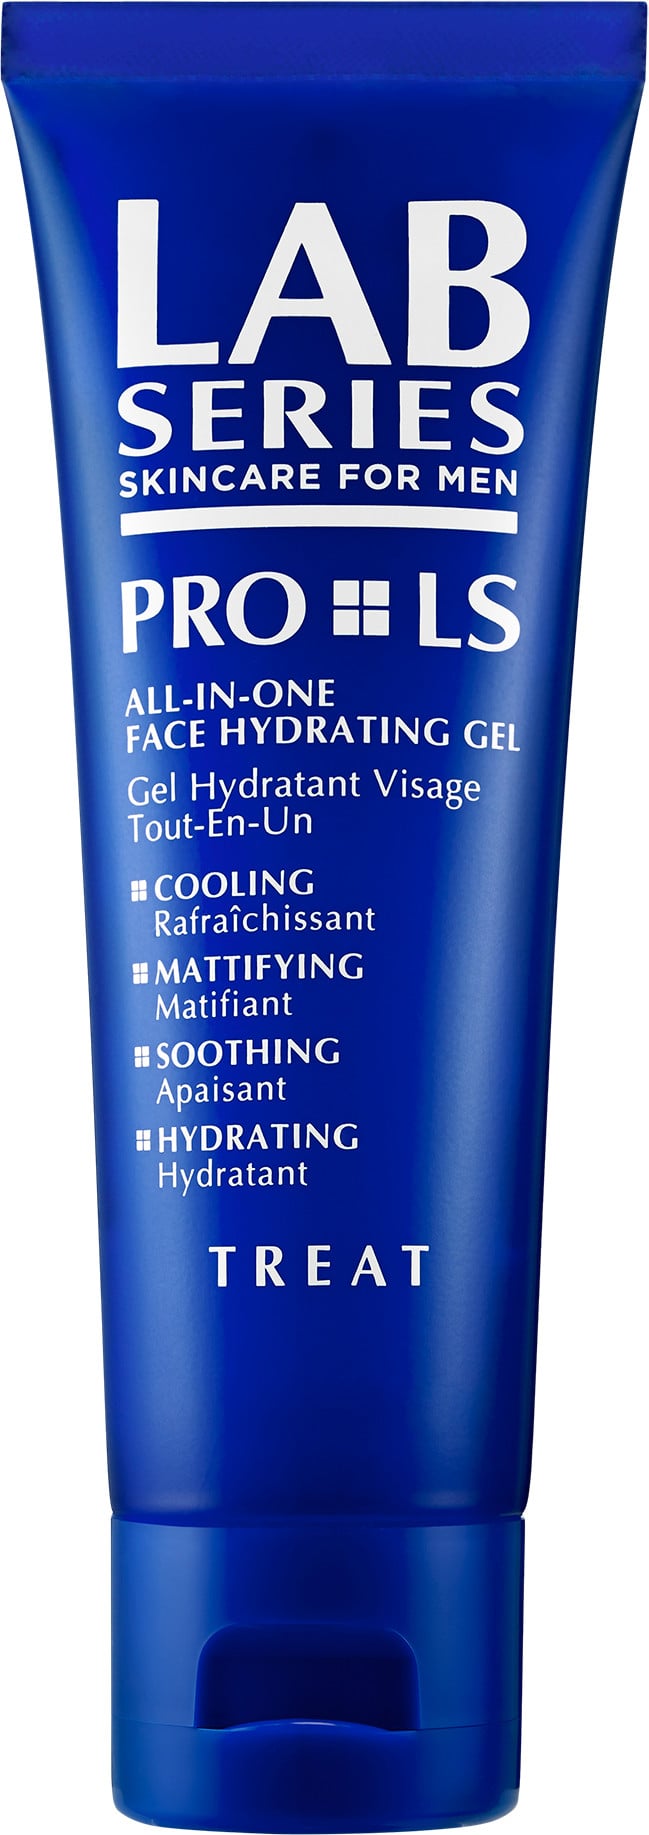 Lab Series Pro LS All-in-One Face Hydrating Gel